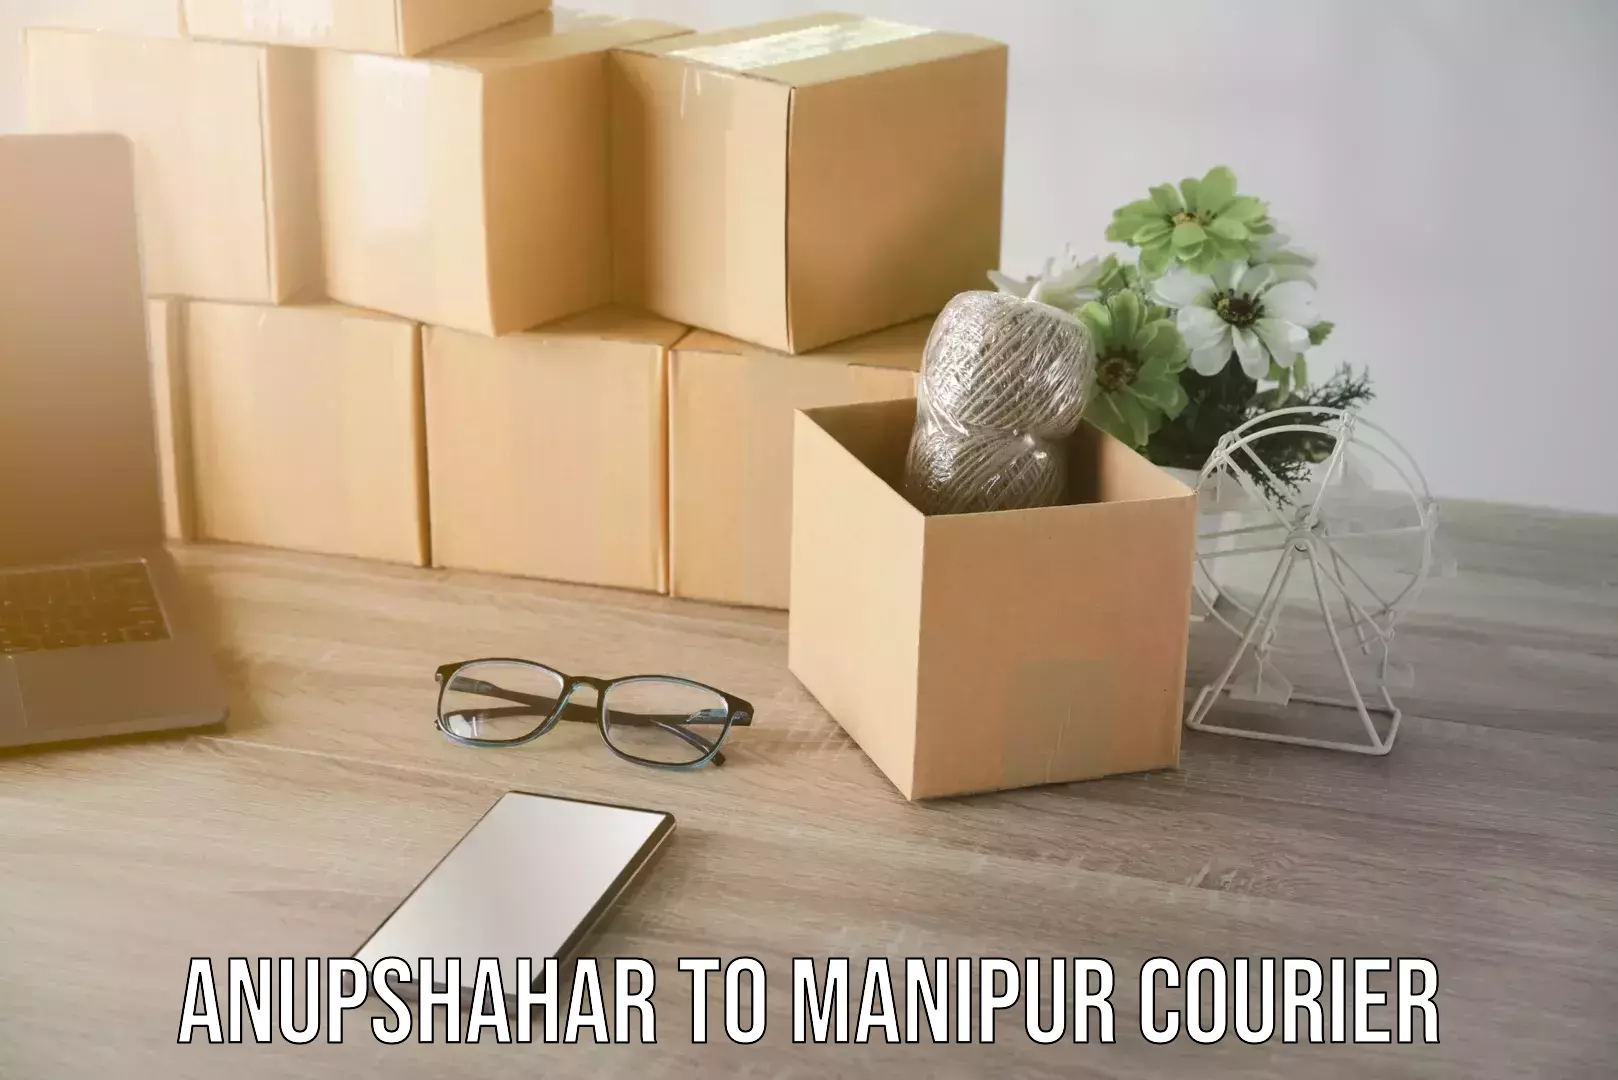 Courier service comparison in Anupshahar to Manipur